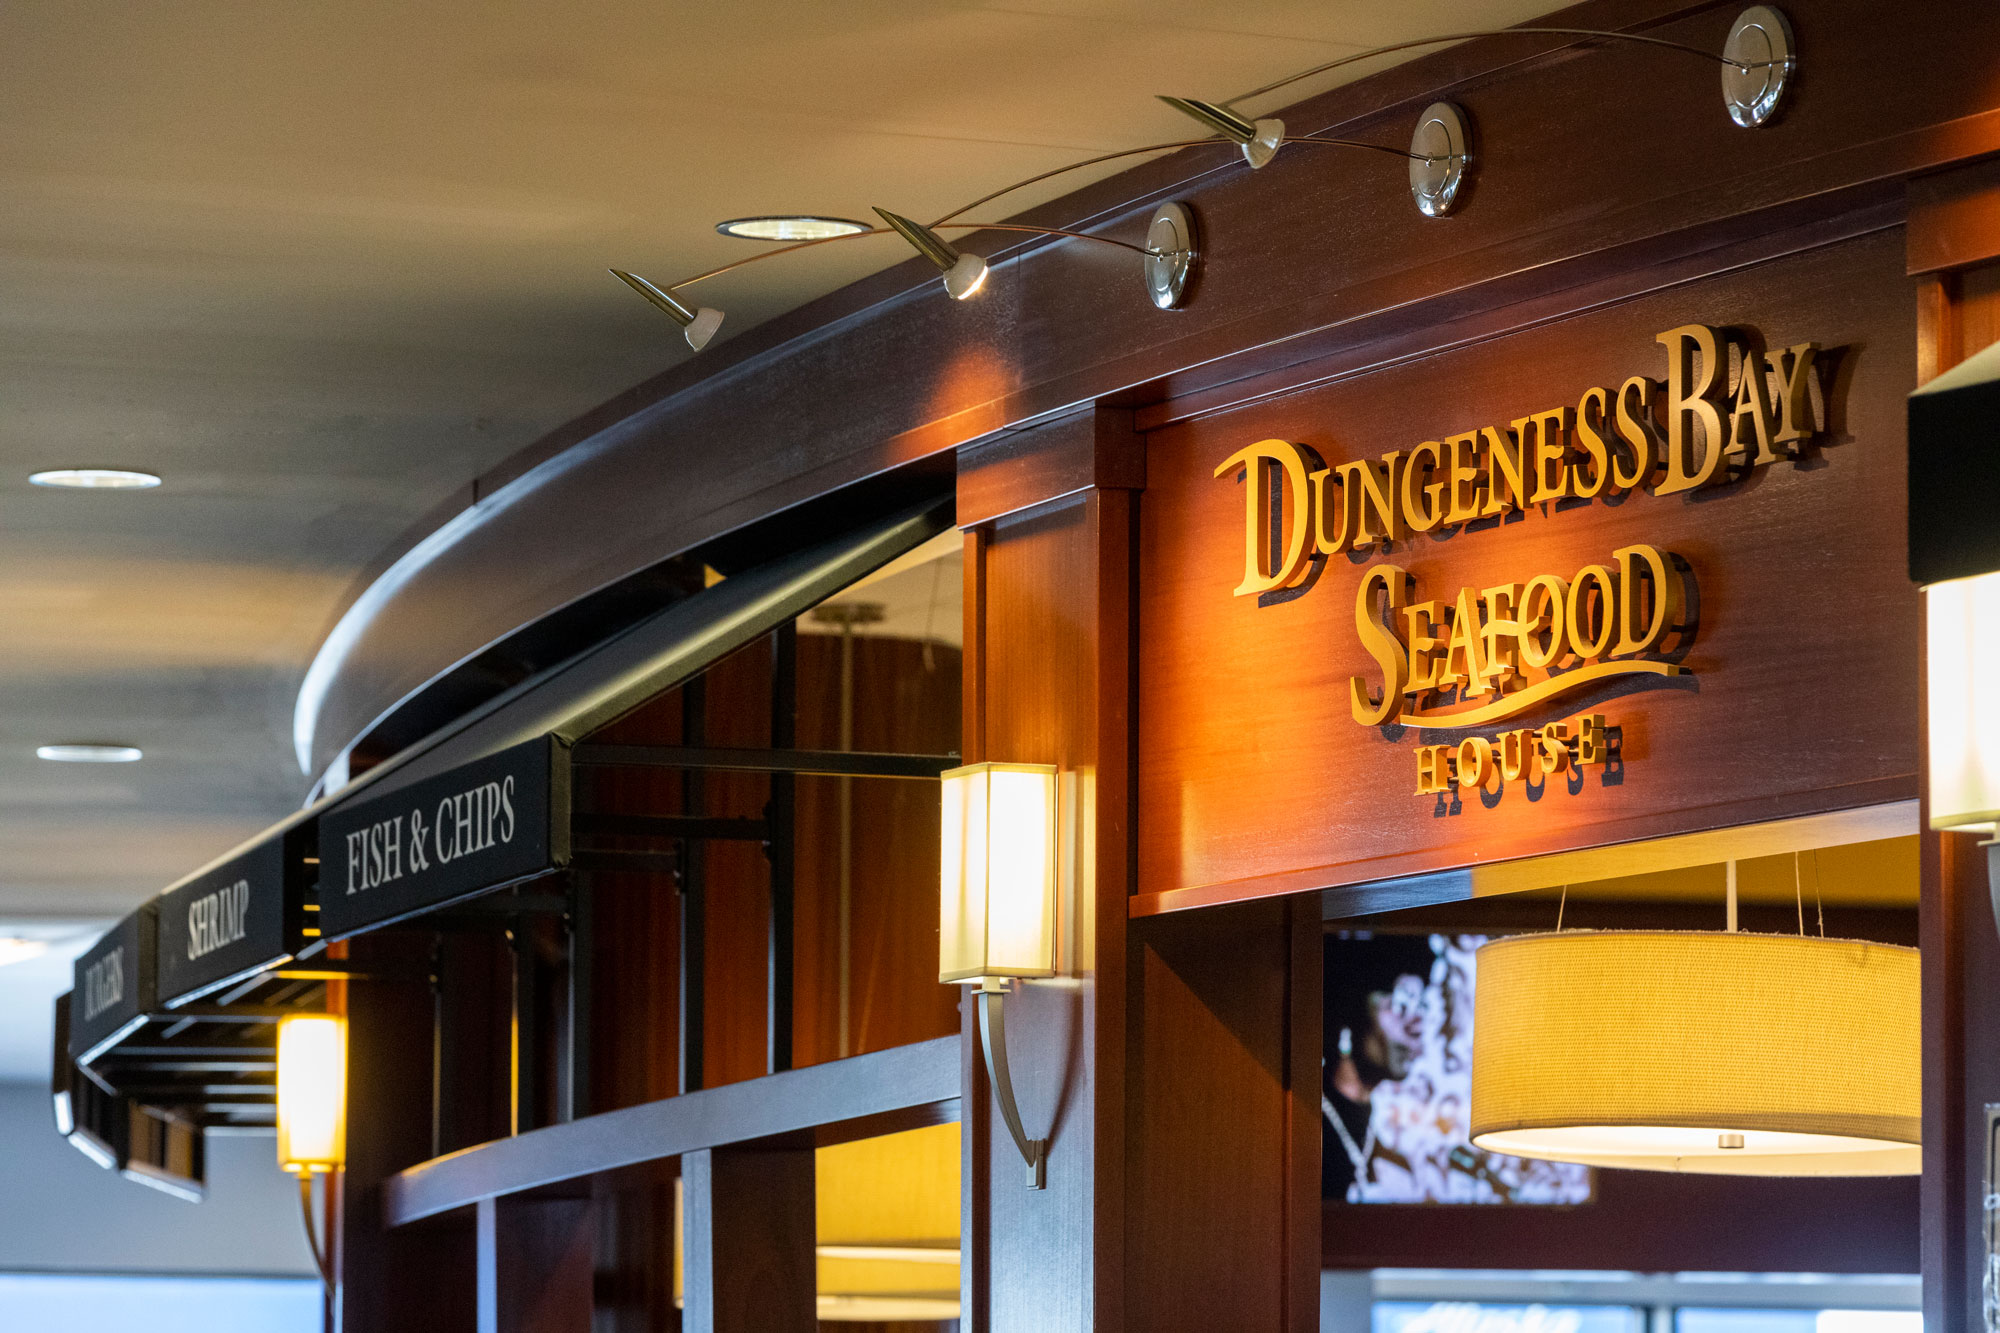 SEA Airport - Dungeness Bay Seafood House Exterior Signage